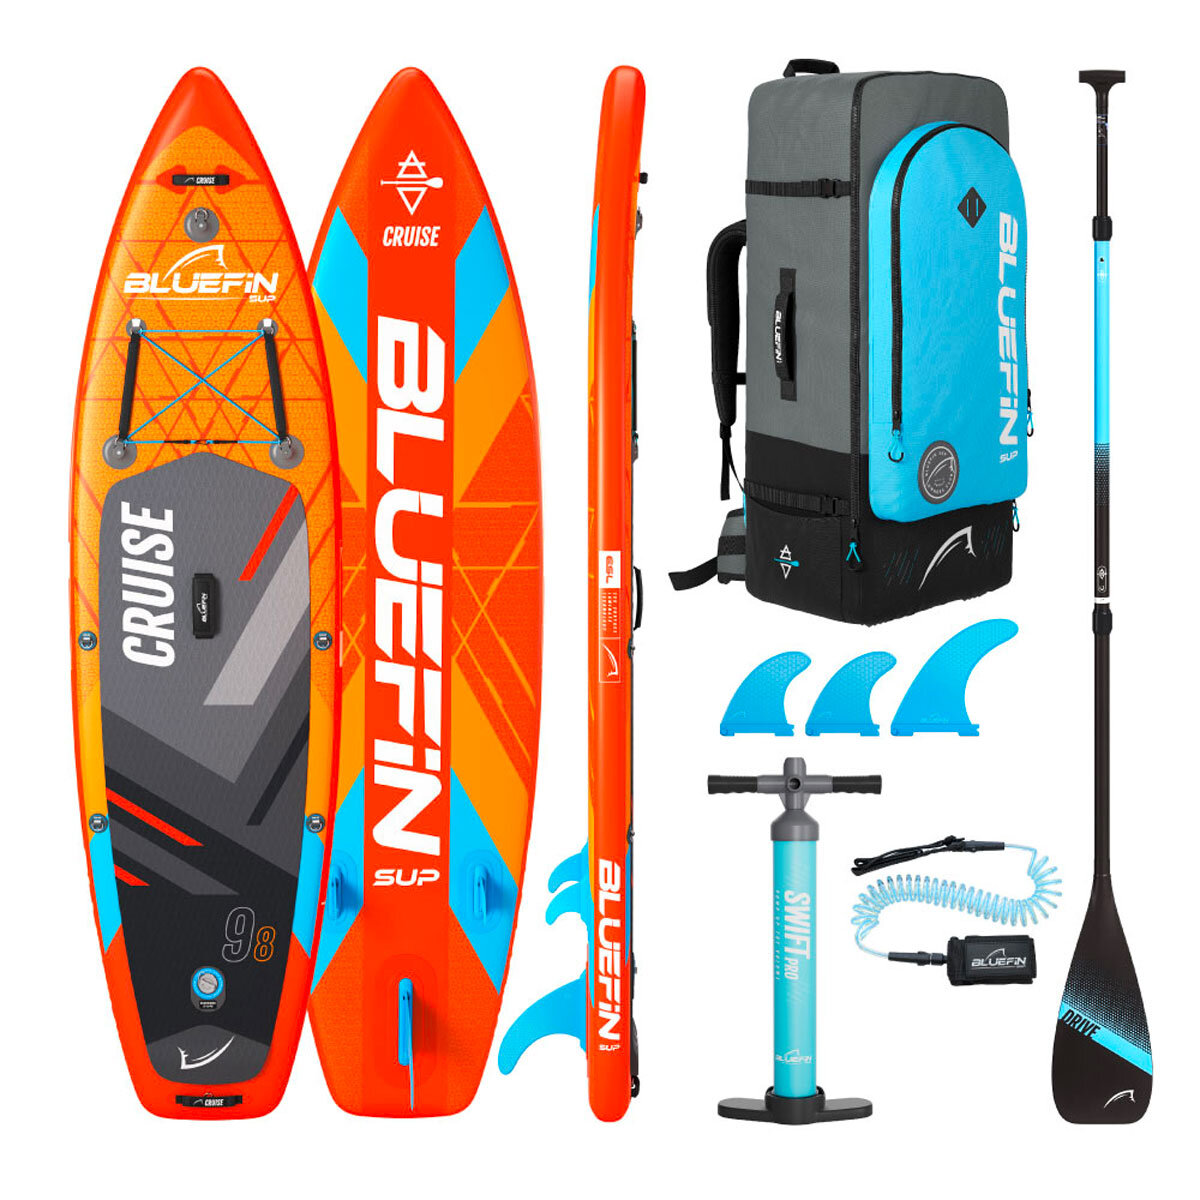 Bluefin Cruise 9.8ft (3.0m) SUP Inflatable Paddleboard Package in Sunburst Orange